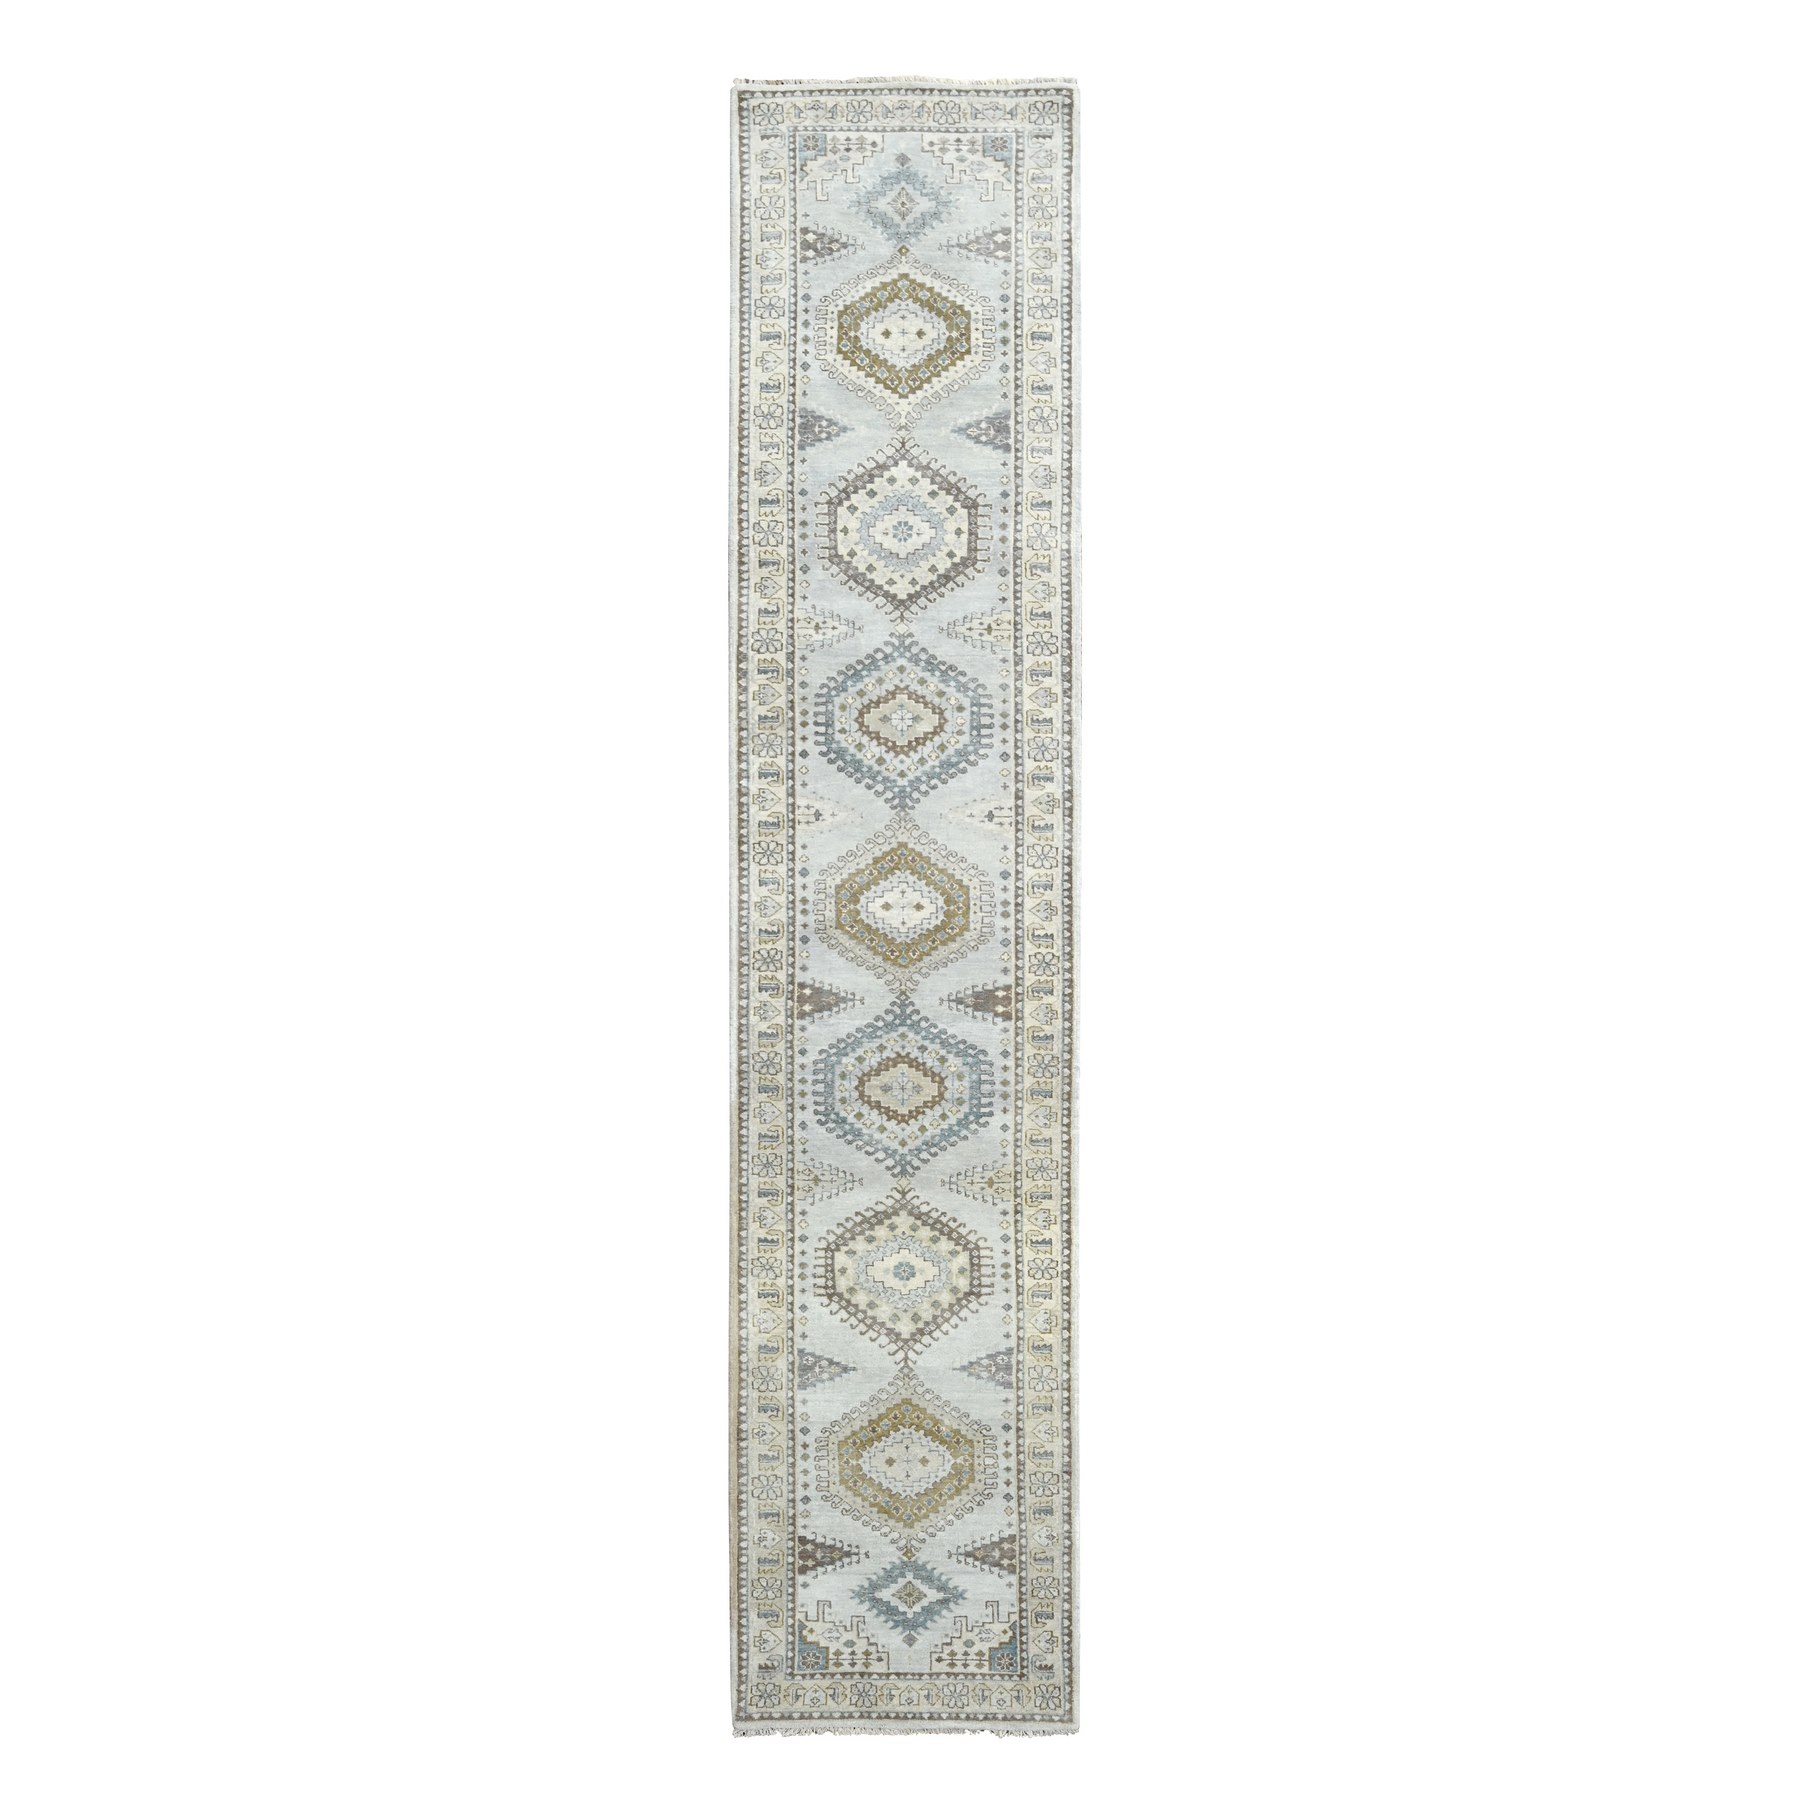 Habor Haze Gray With Ivory Border, Extra Soft Wool, Natural Dyes, Denser Weave, Hand Knotted Persian Village Inspired Geometric Medallions Design, Soft Pile, Oriental Runner Rug 